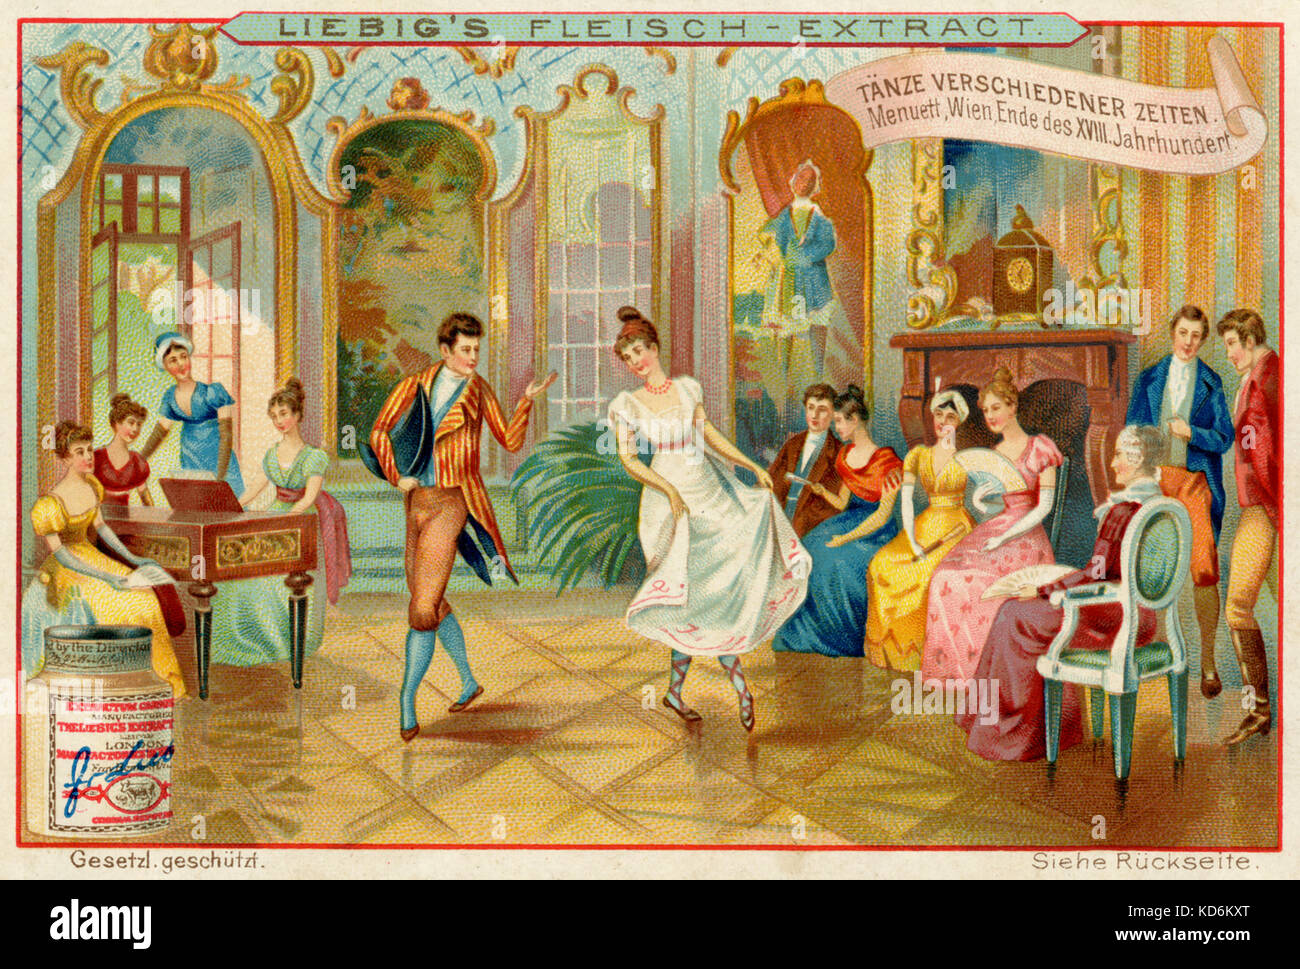 Couple dancing the minuet at end of 18th century. Ornate baroque hall in Vienna, Austria.  harpsichord.  Elegant society. Liebig Fleisch-Extract collection cards. Stock Photo